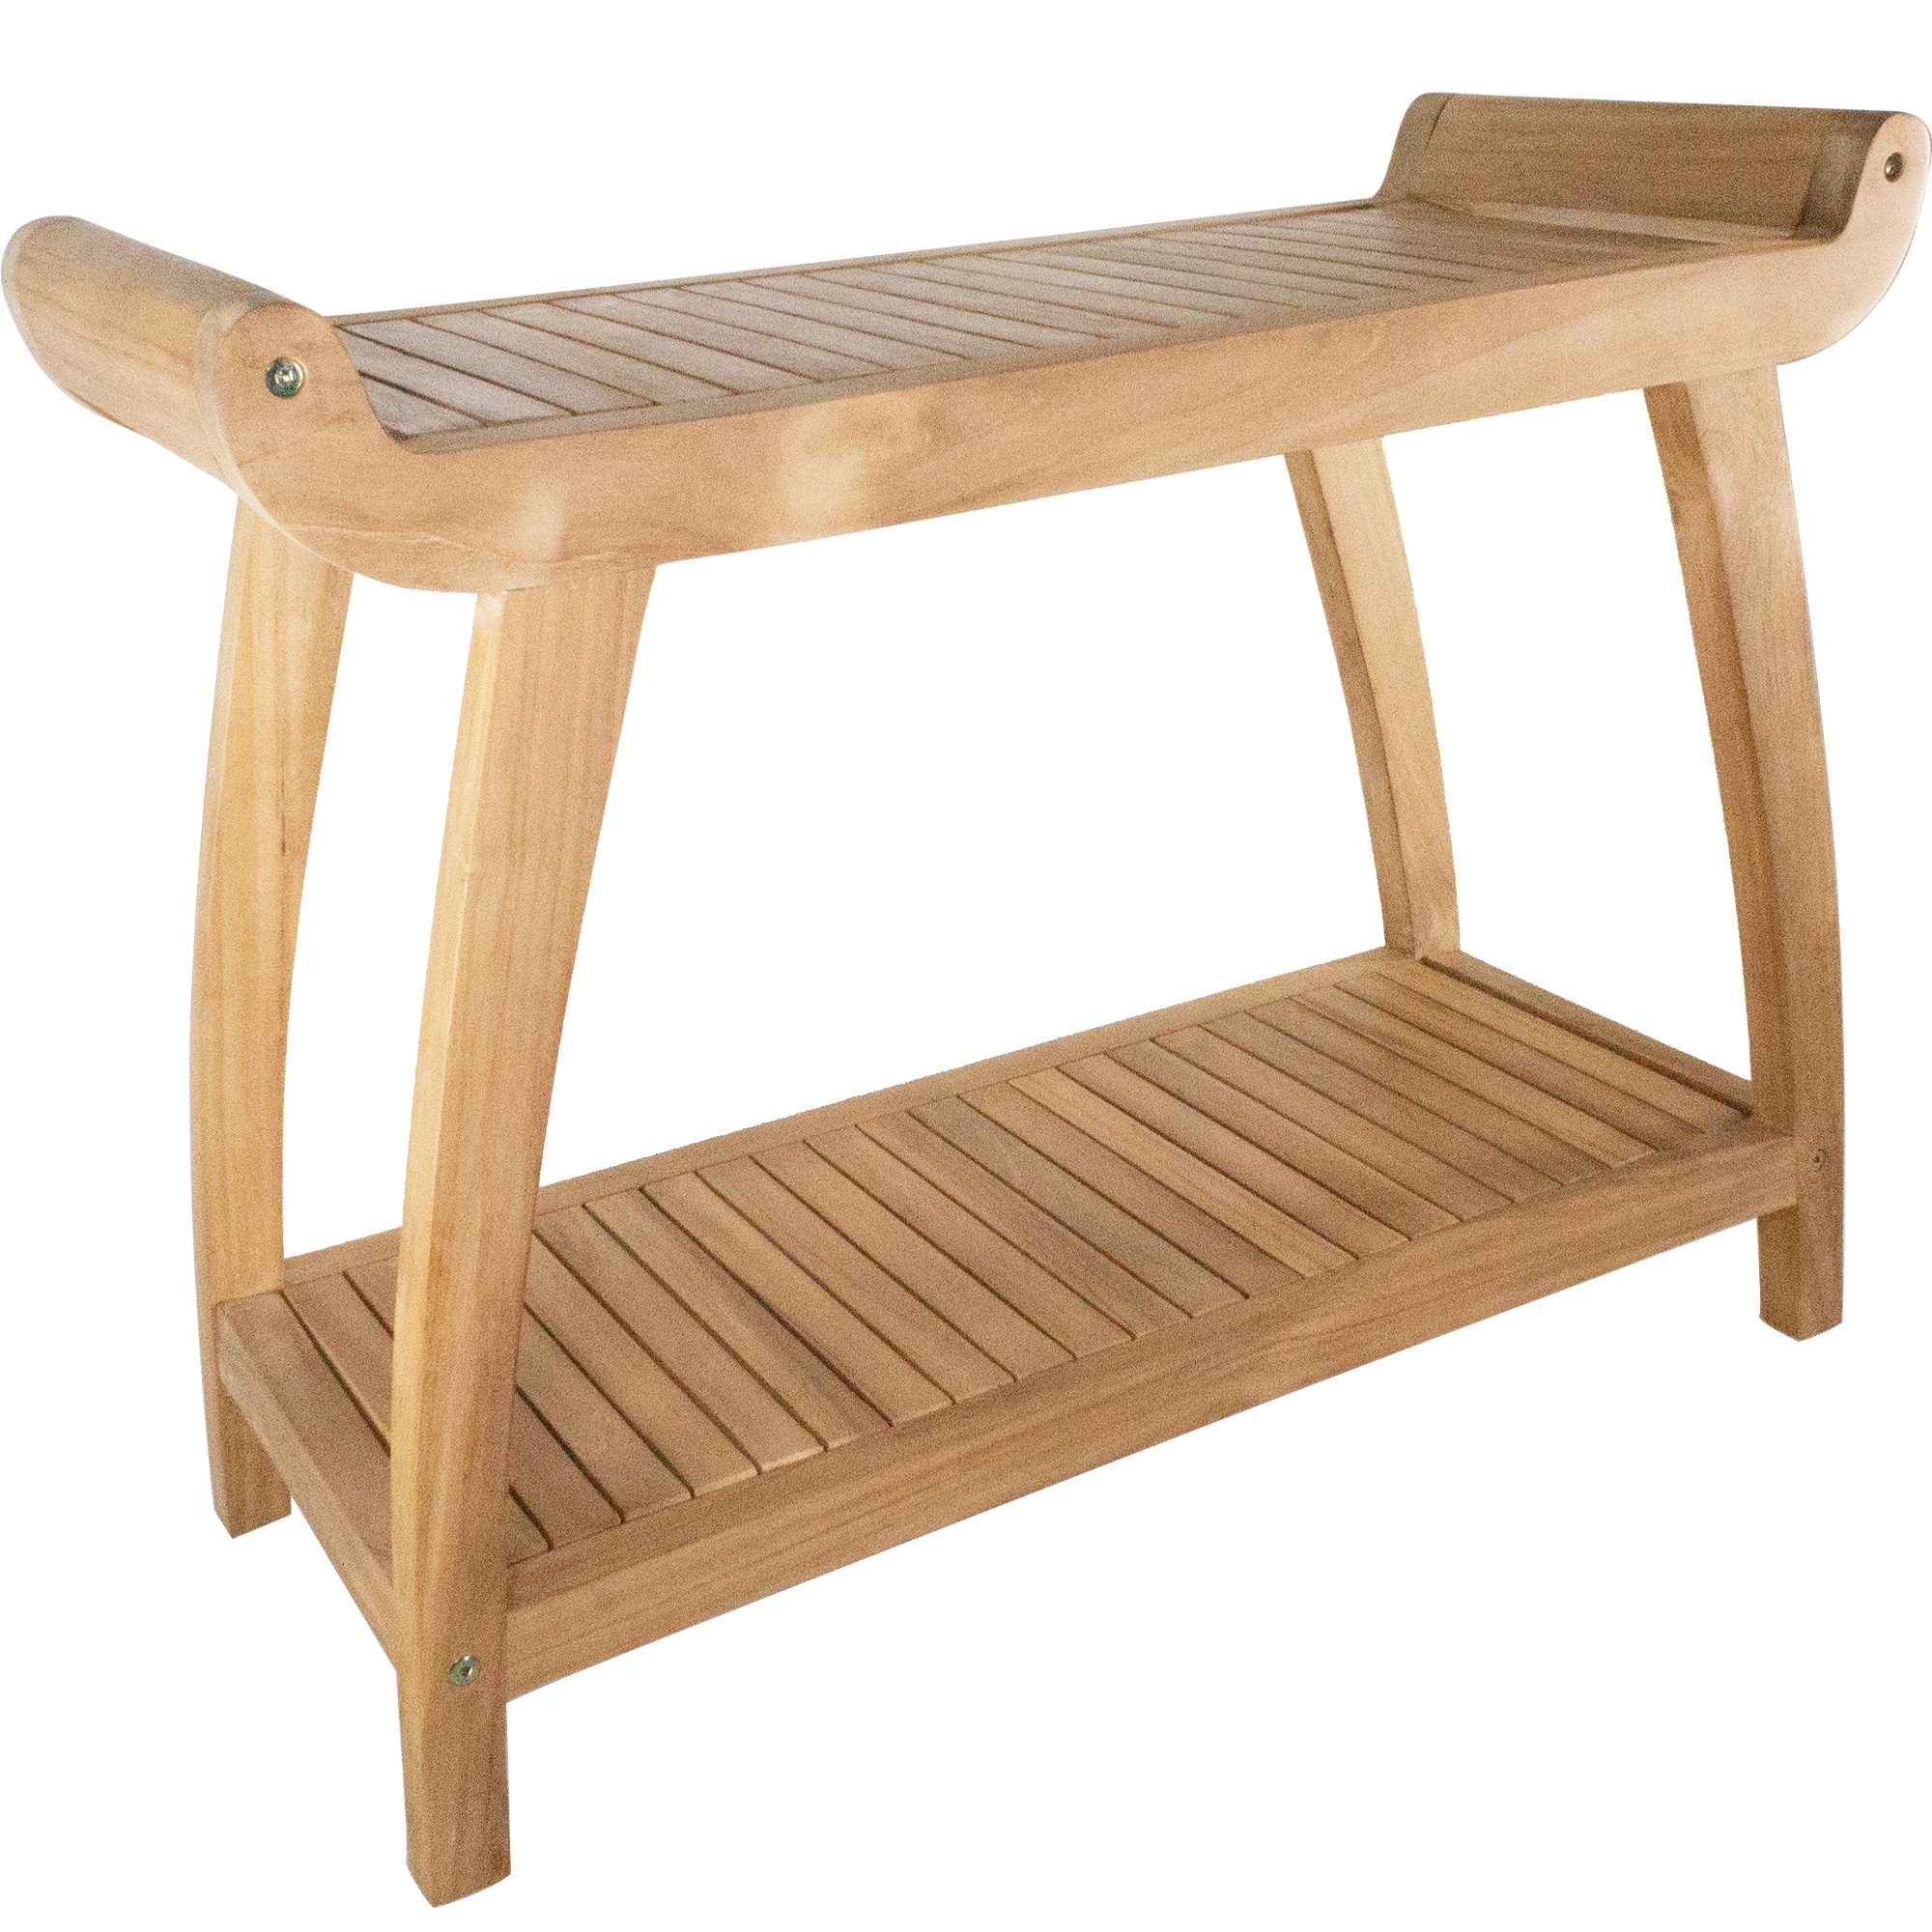 https://ak1.ostkcdn.com/images/products/is/images/direct/3c1bdde576f5c4af81c1bc5ba5e9cba887487ba1/Nordic-Style-Natural-Curved-Spa-Bench-with-Shelf---30%22.jpg